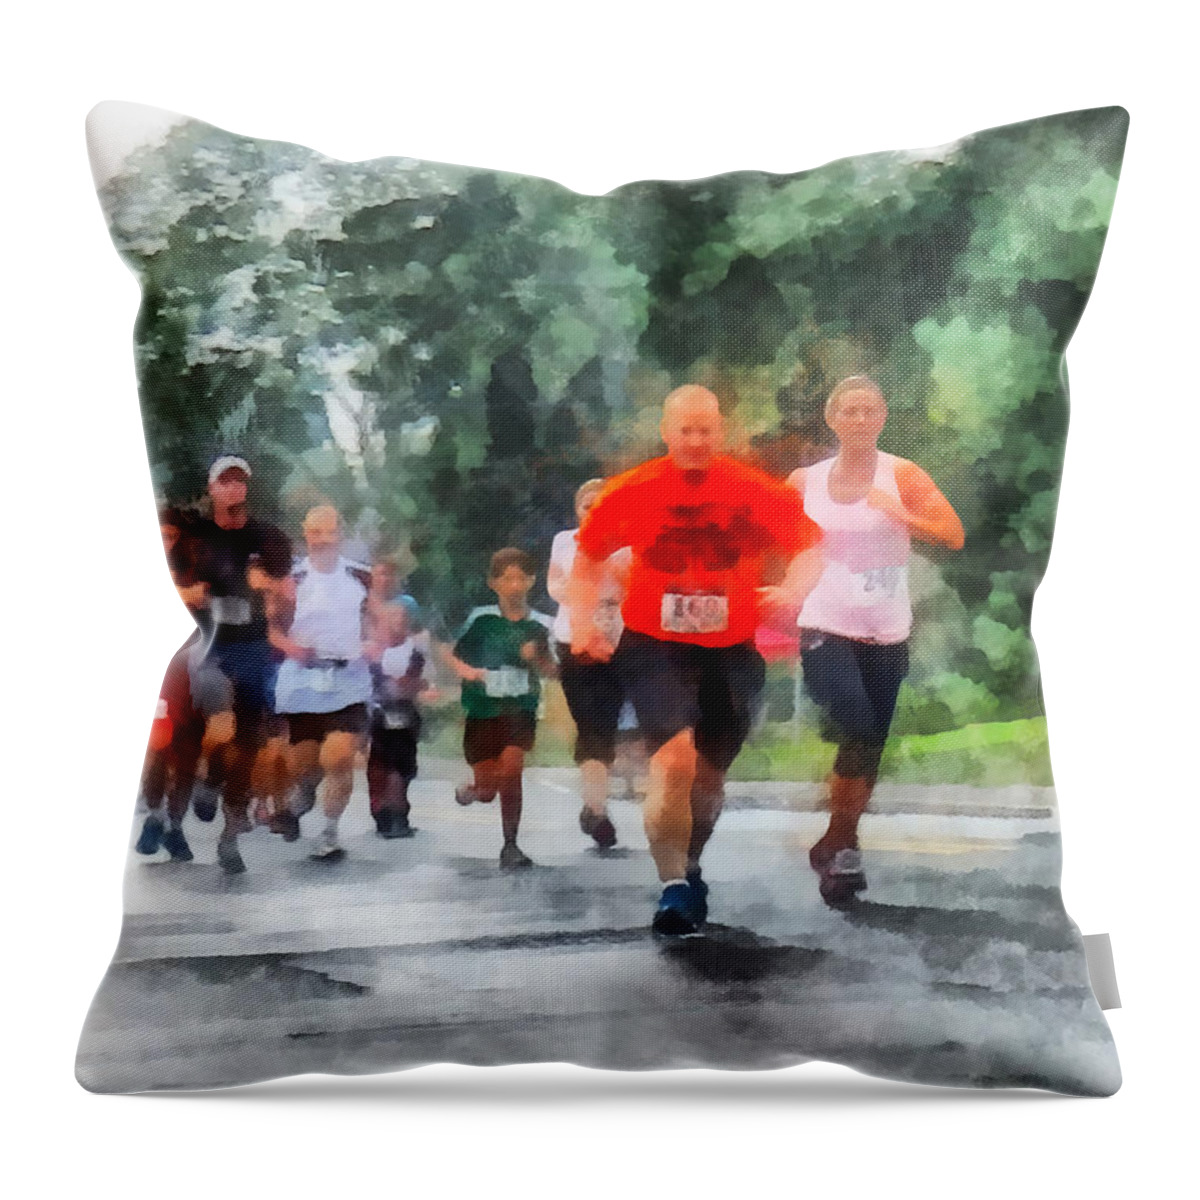 Run Throw Pillow featuring the photograph Racing in the Rain by Susan Savad